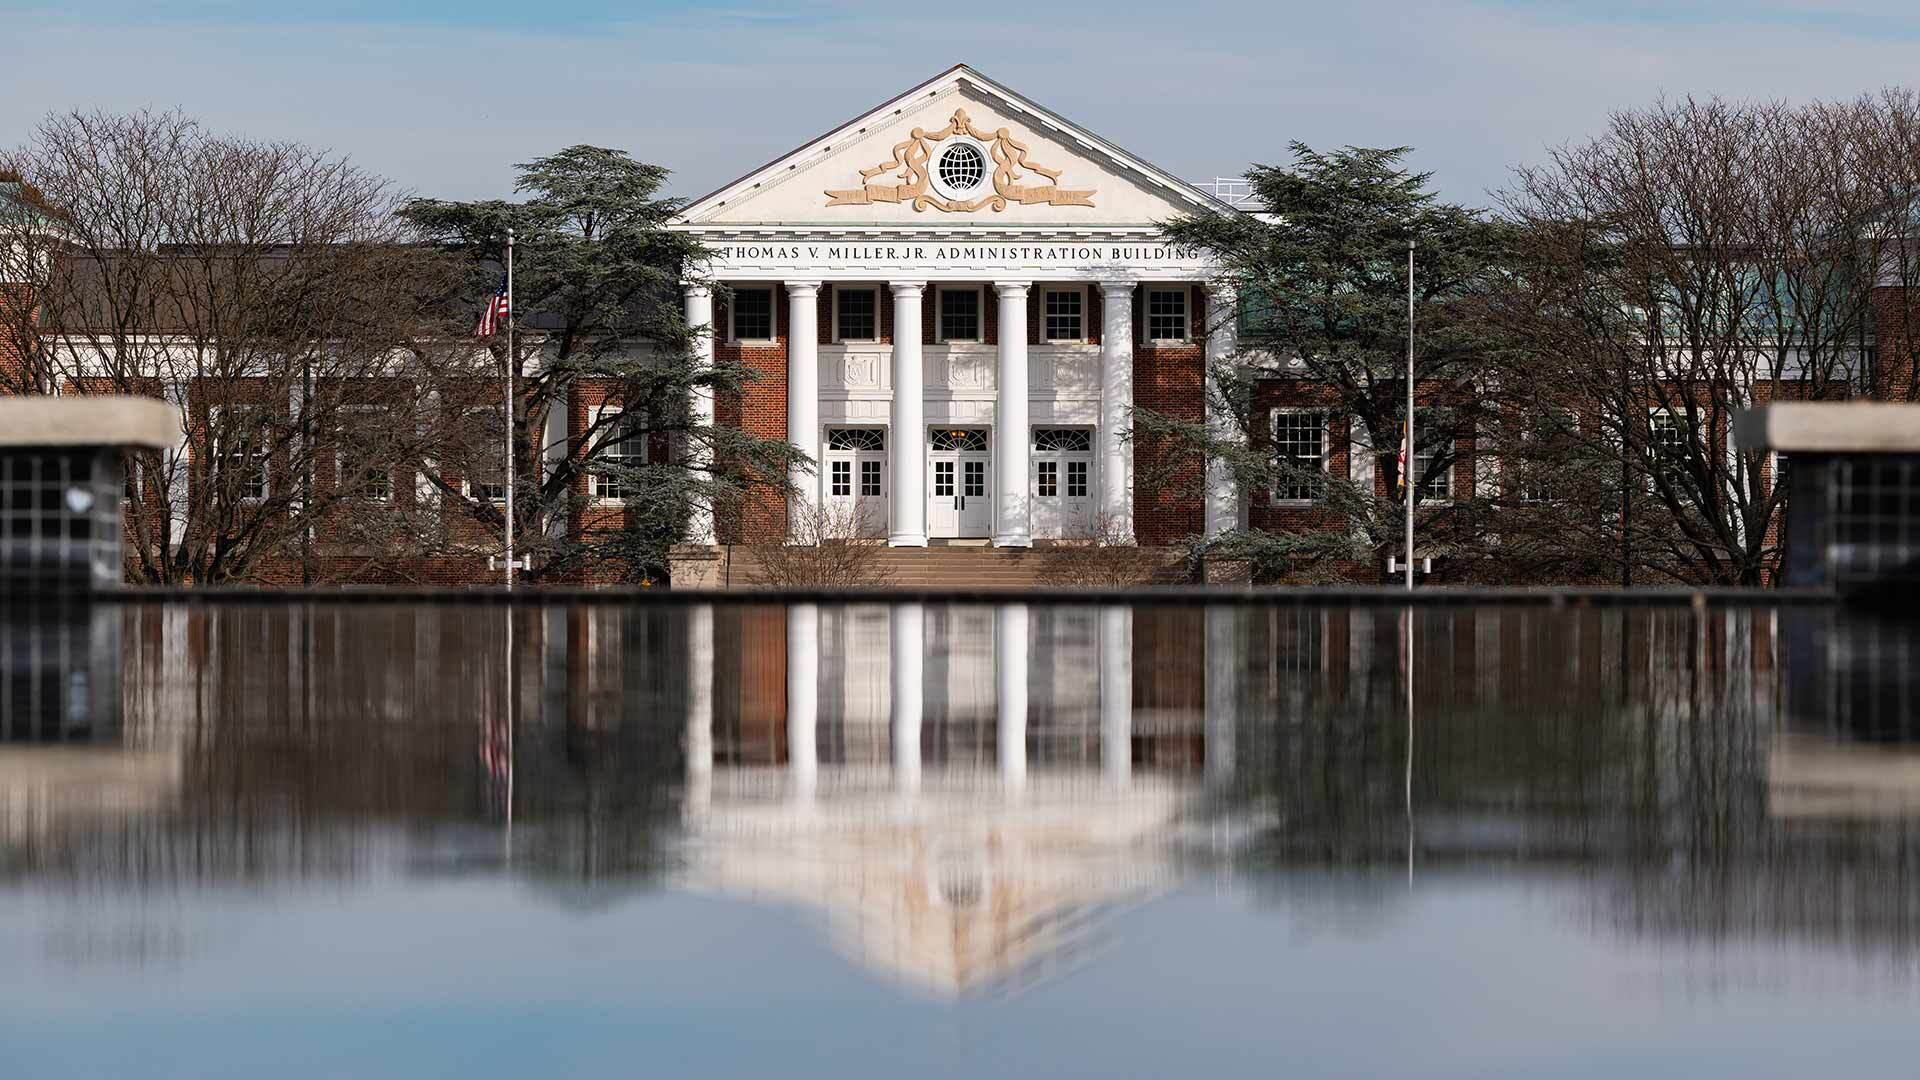 Main admin building reflected in fountain